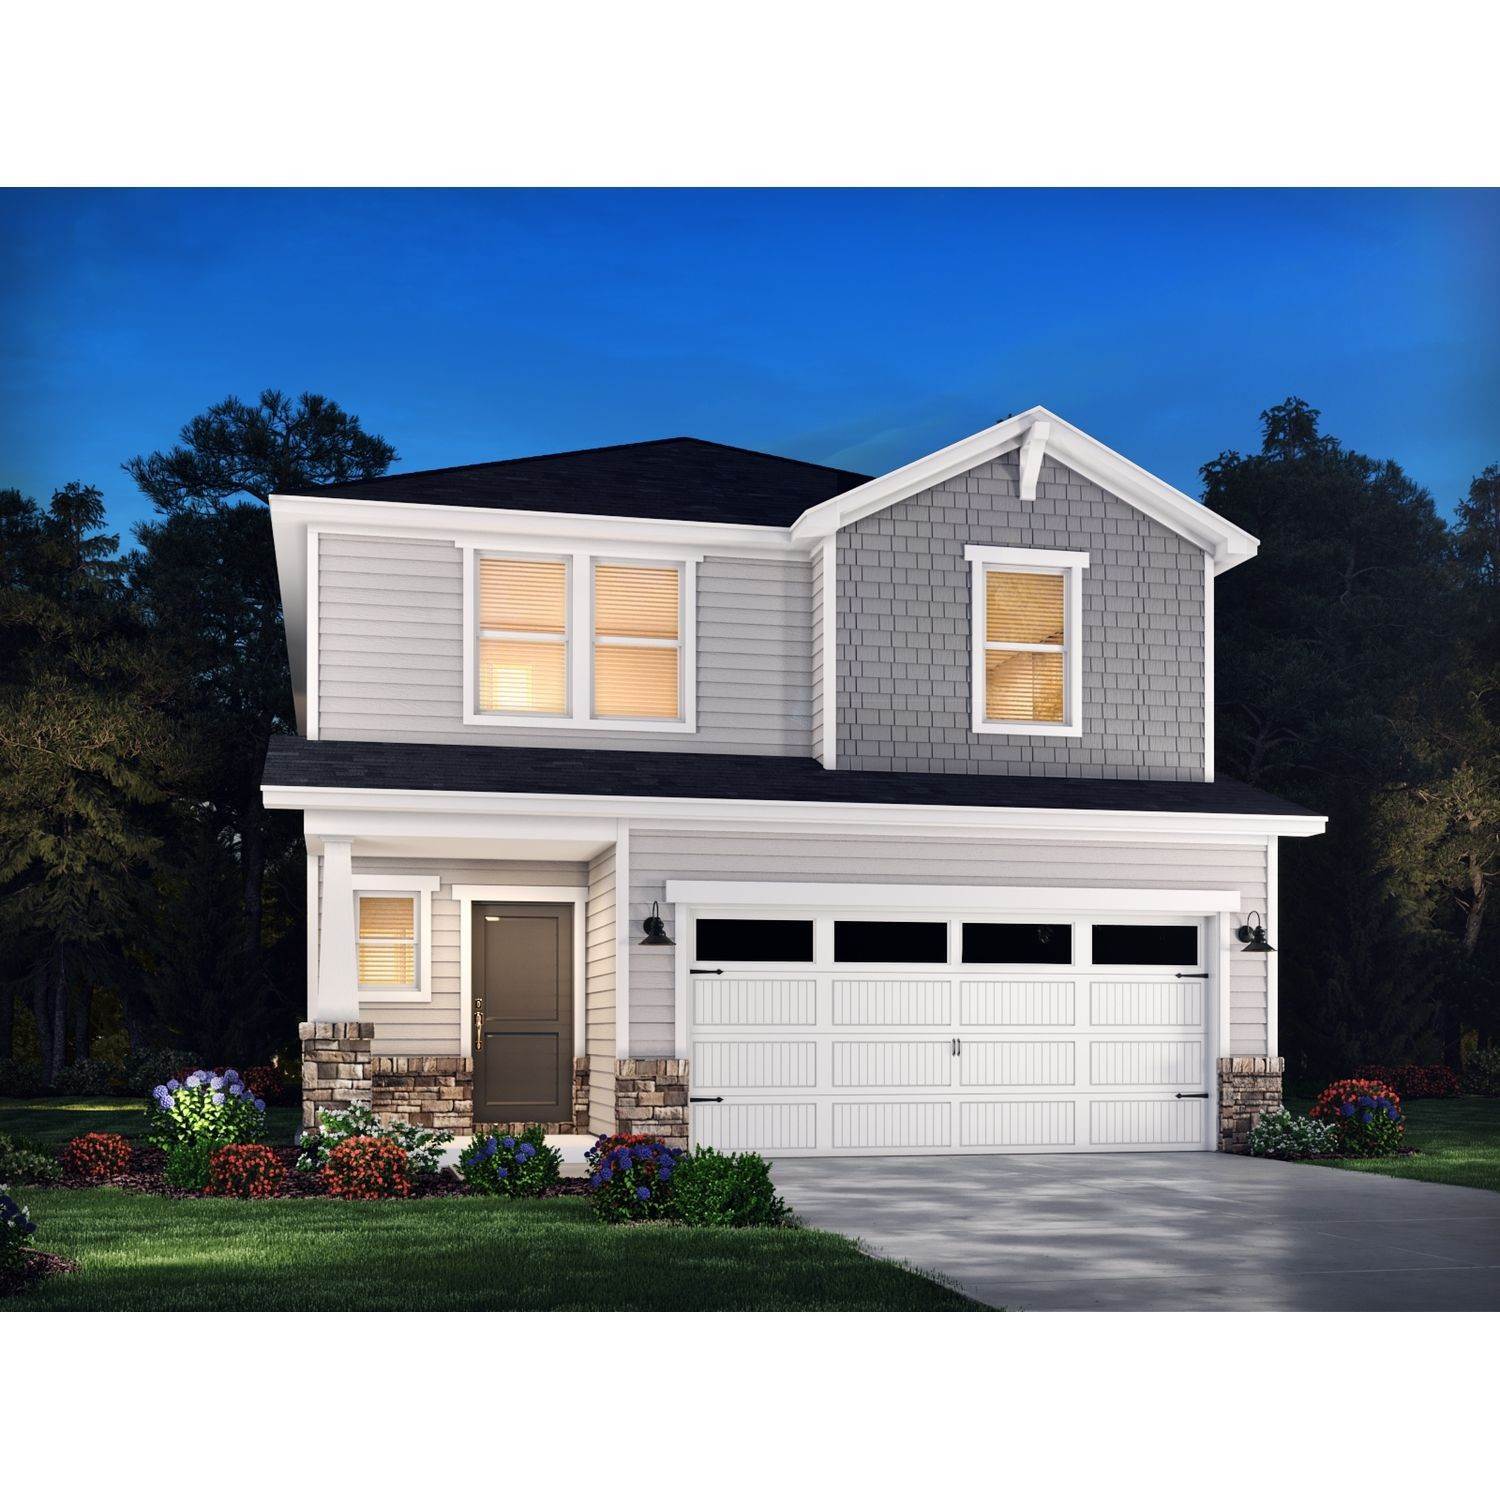 Single Family for Sale at York, SC 29745